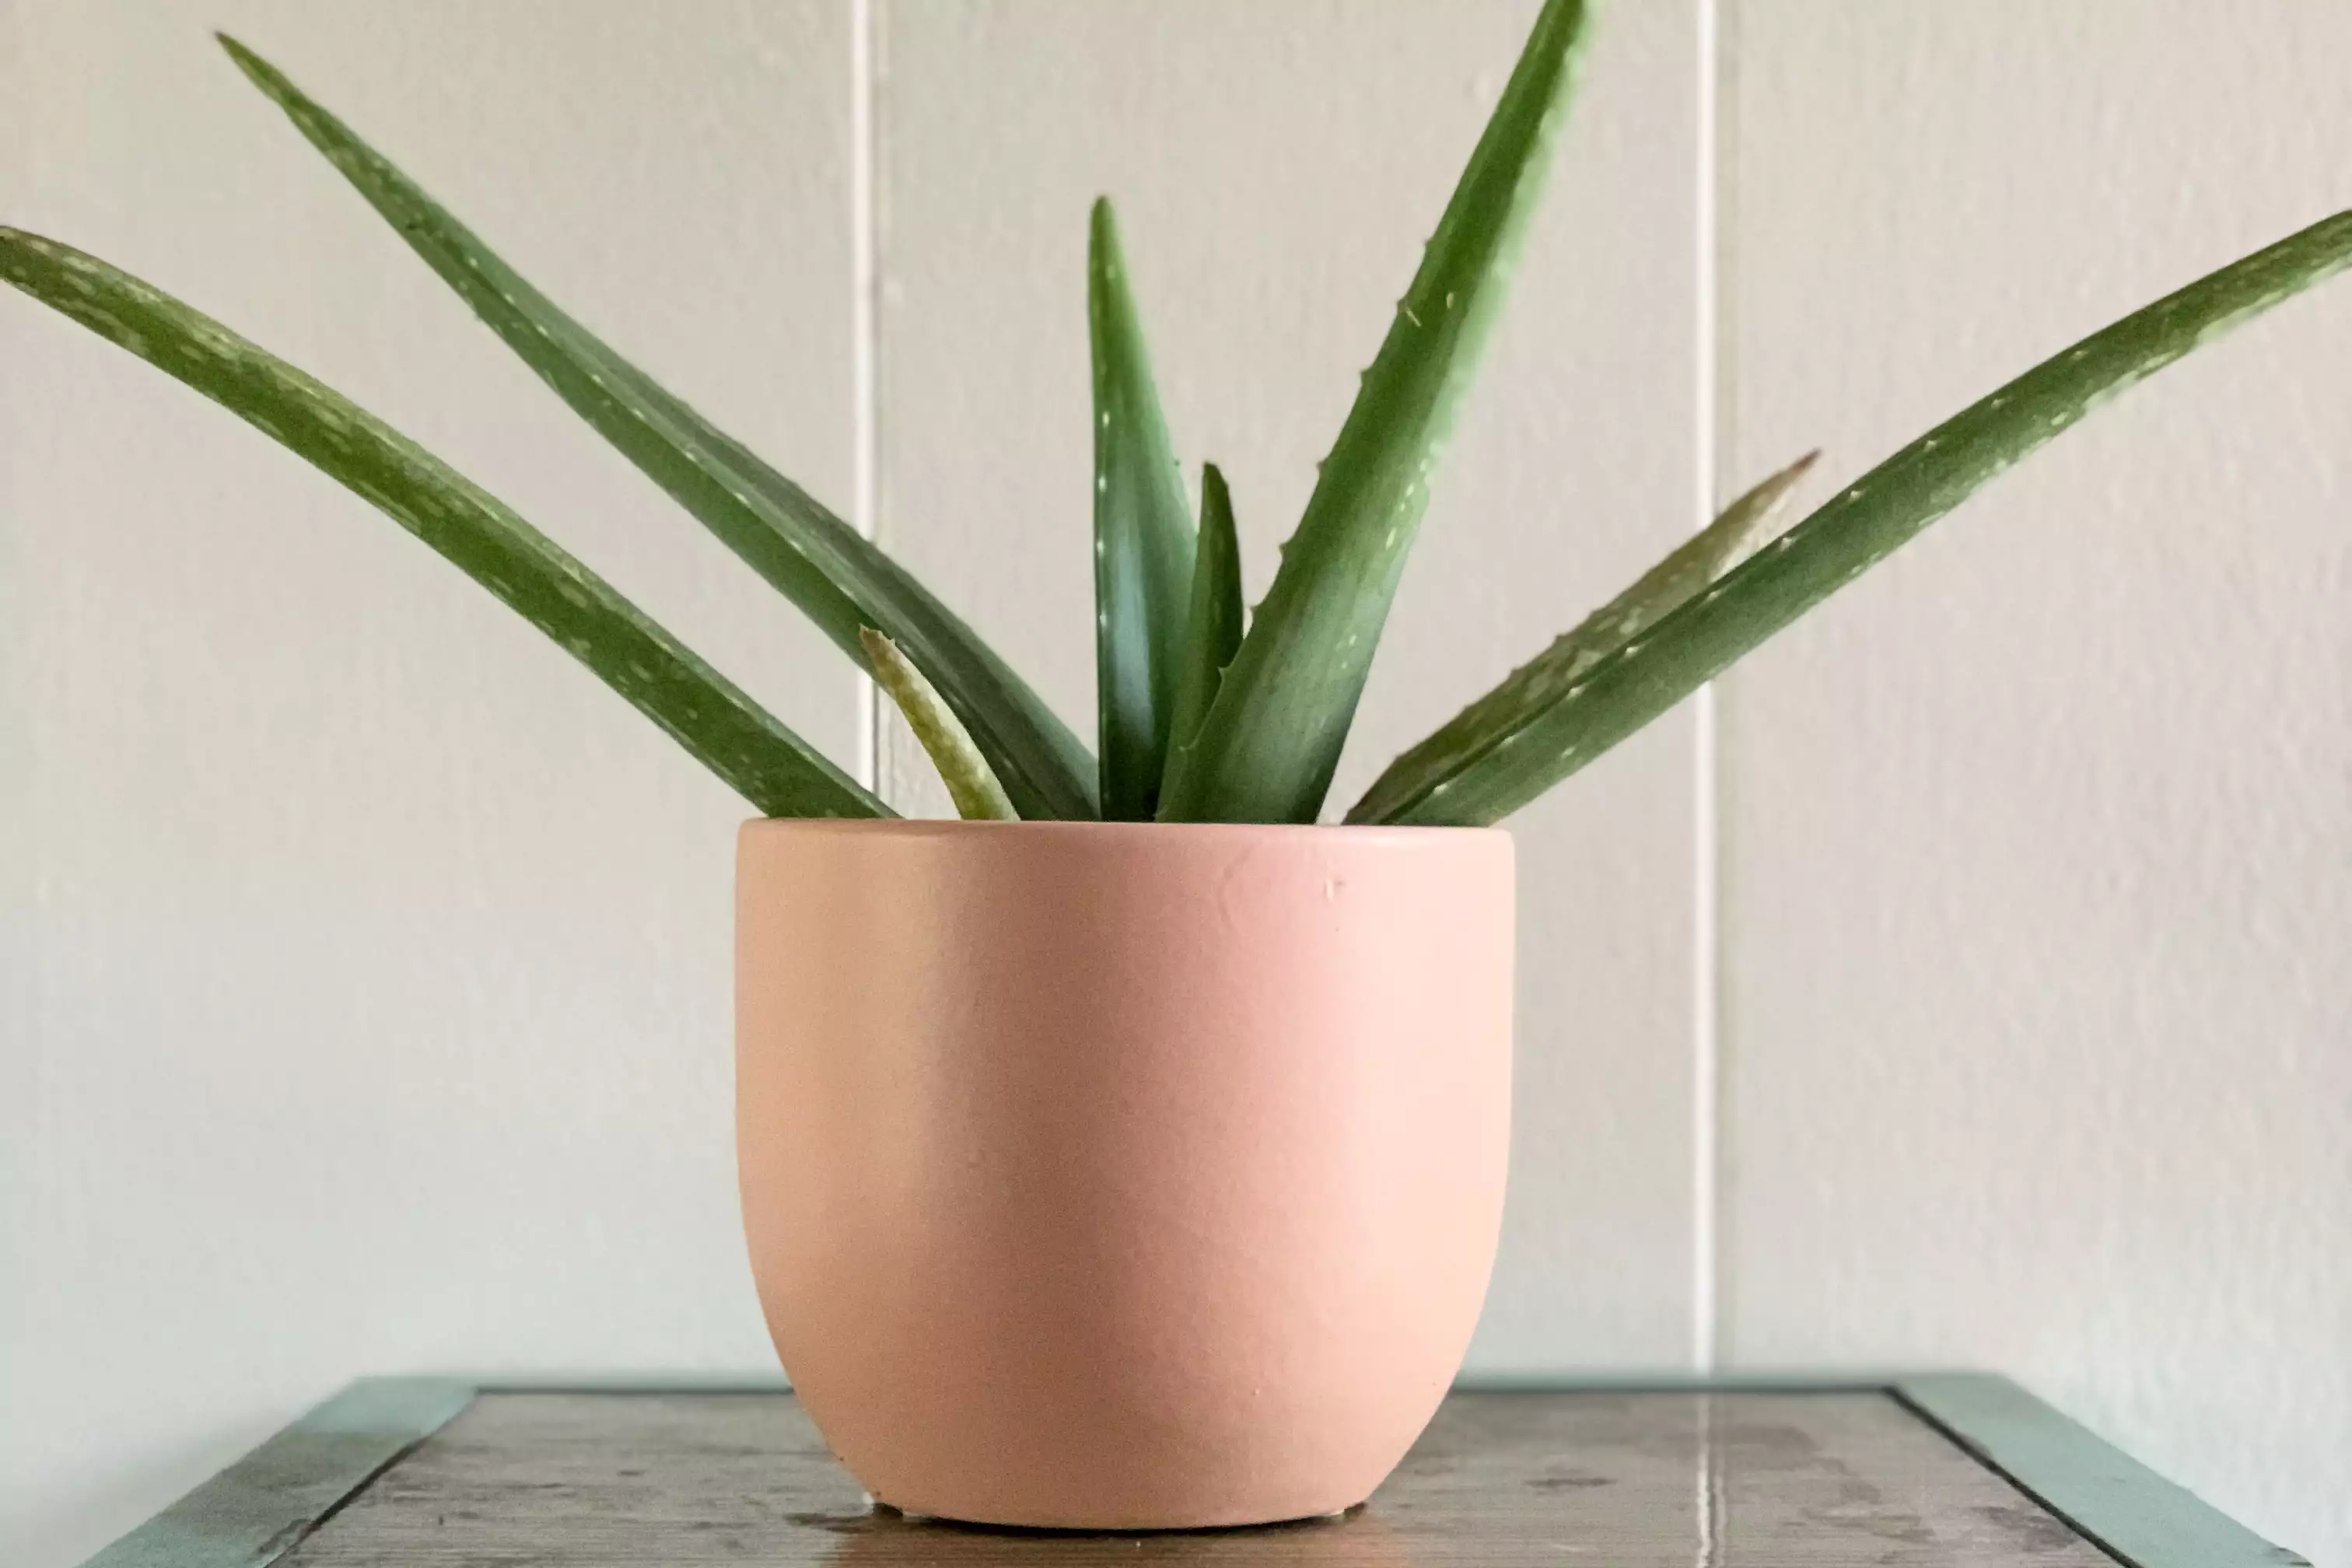 aloe vera houseplant in pink pot against white wall